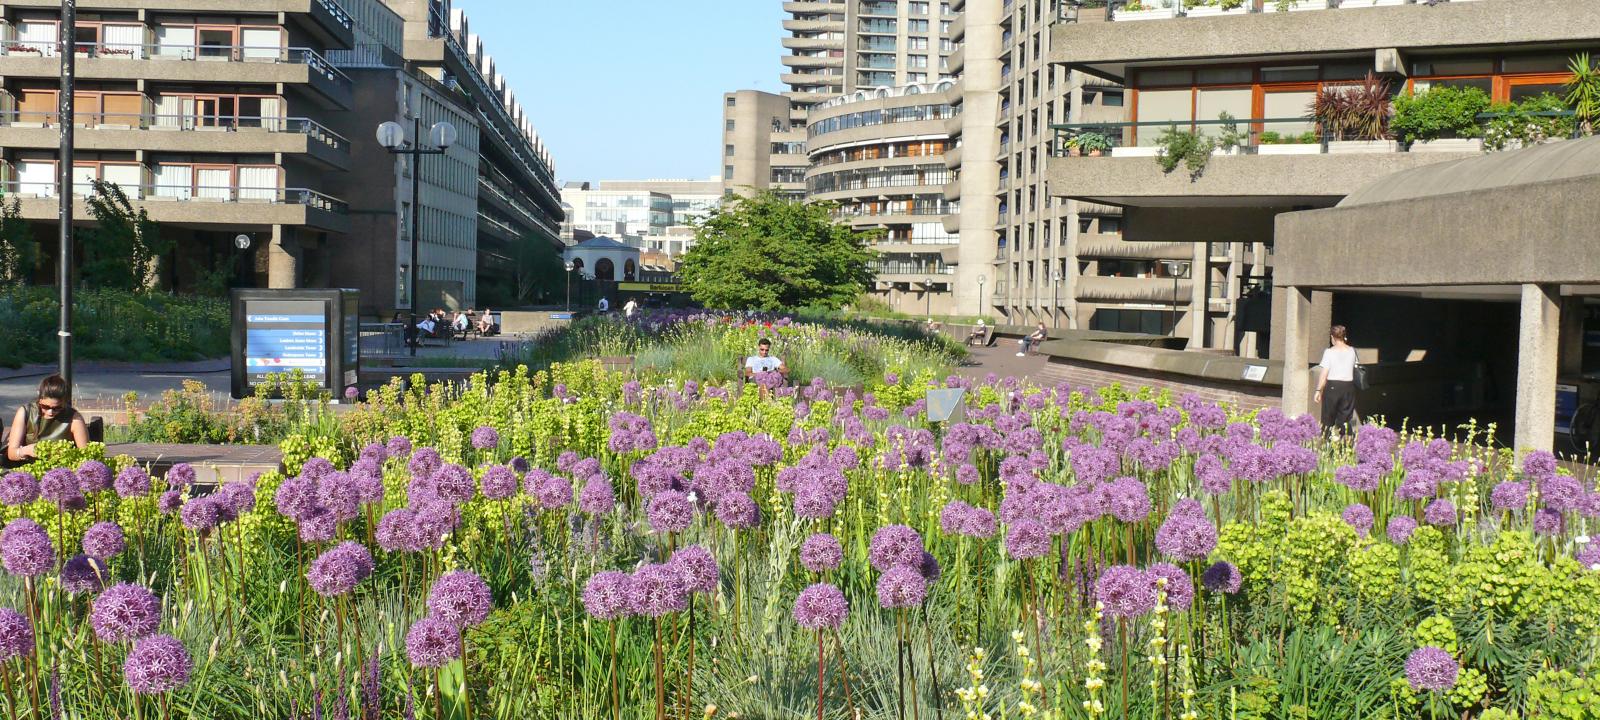 Pink Allium and other flowers surrounded by residential buildings